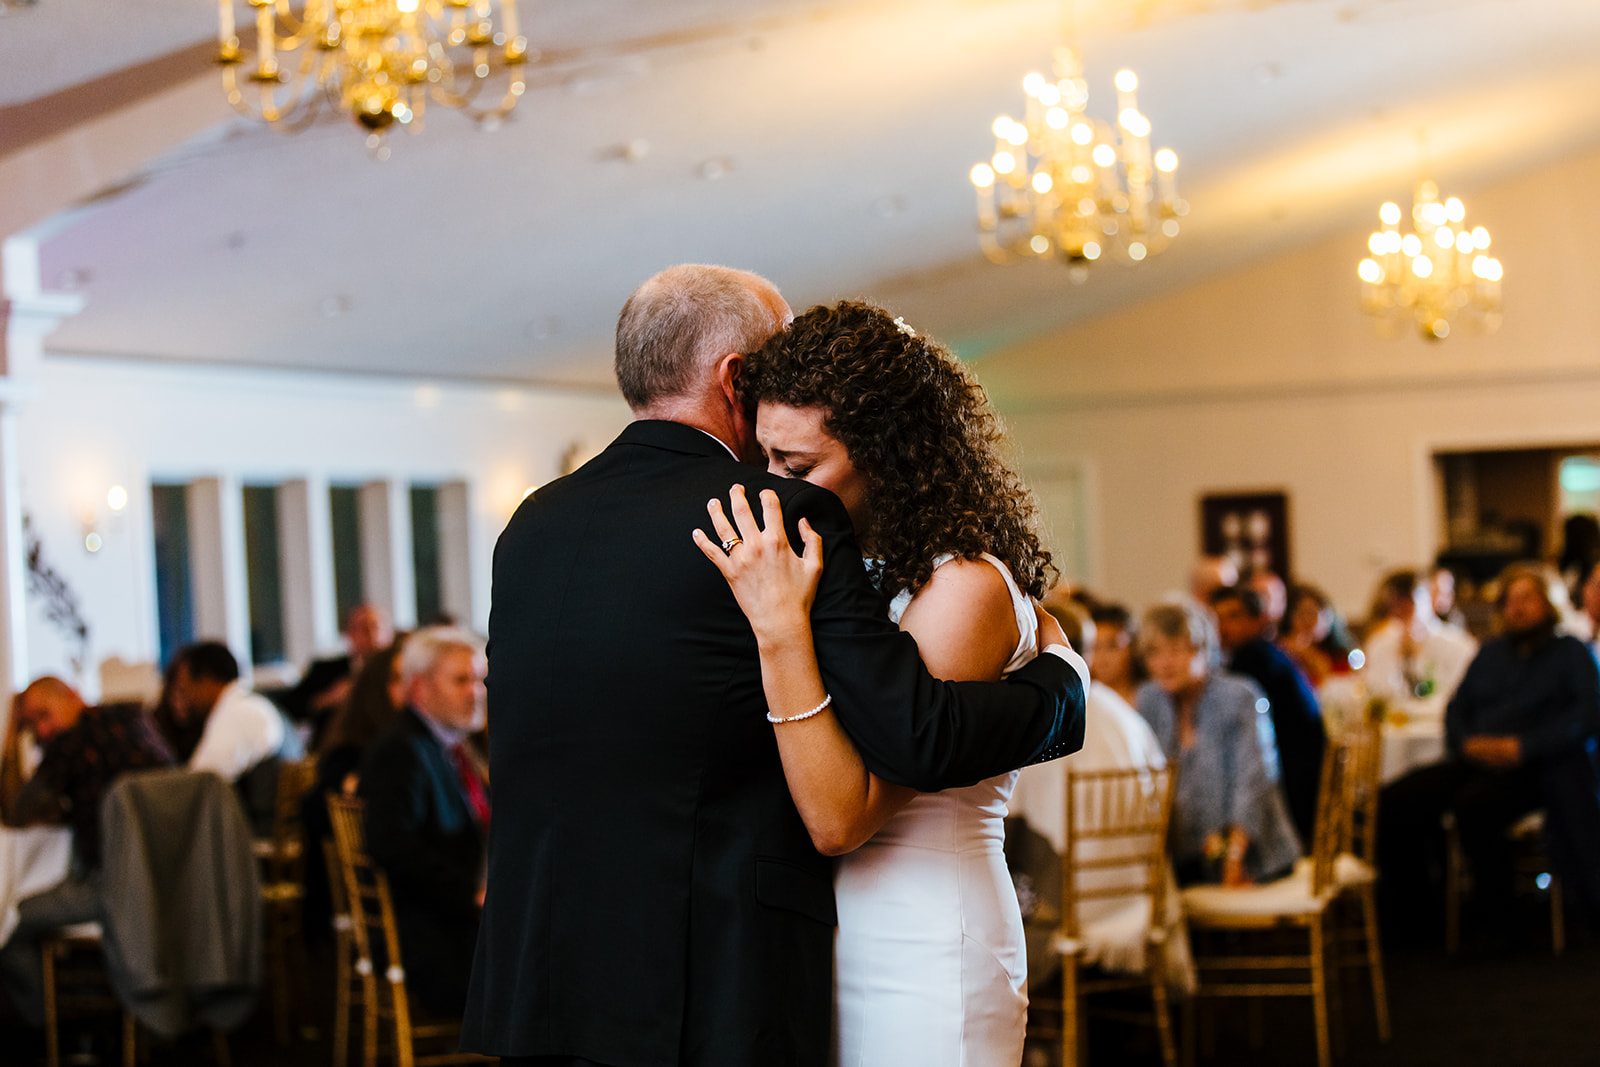 Bride dances with her father at her wedding at Traditions in Syracuse, NY.